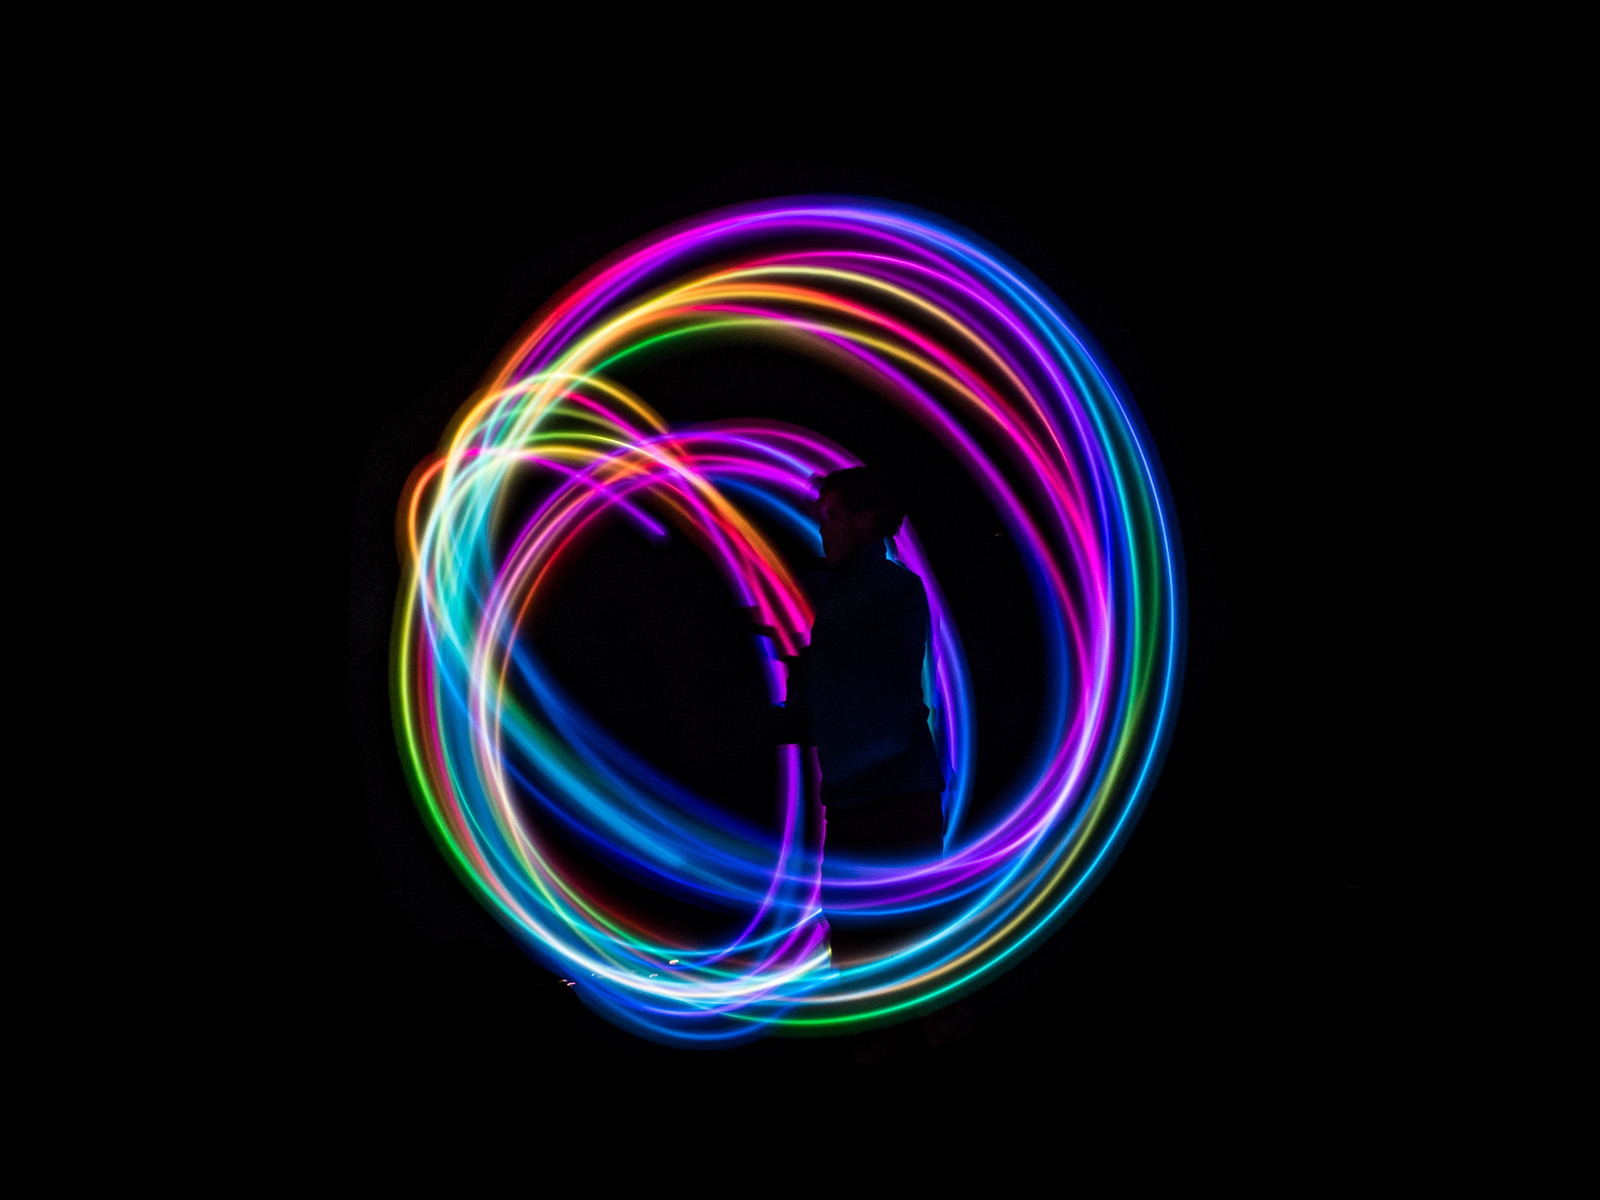 Design of a swirl of colours on a black background.